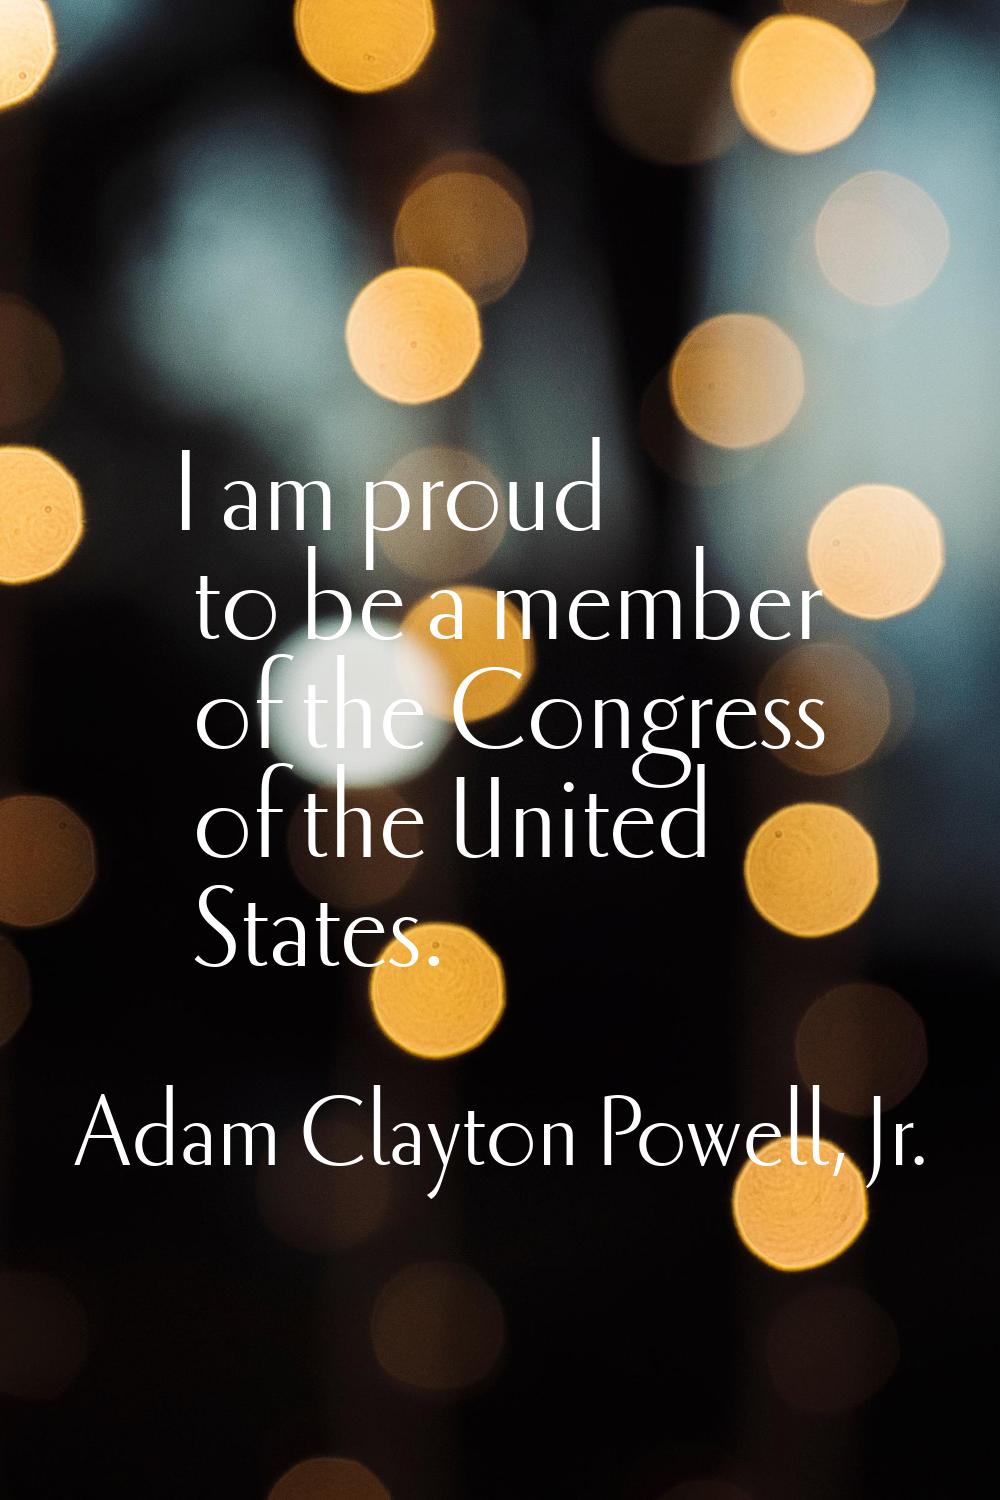 I am proud to be a member of the Congress of the United States.